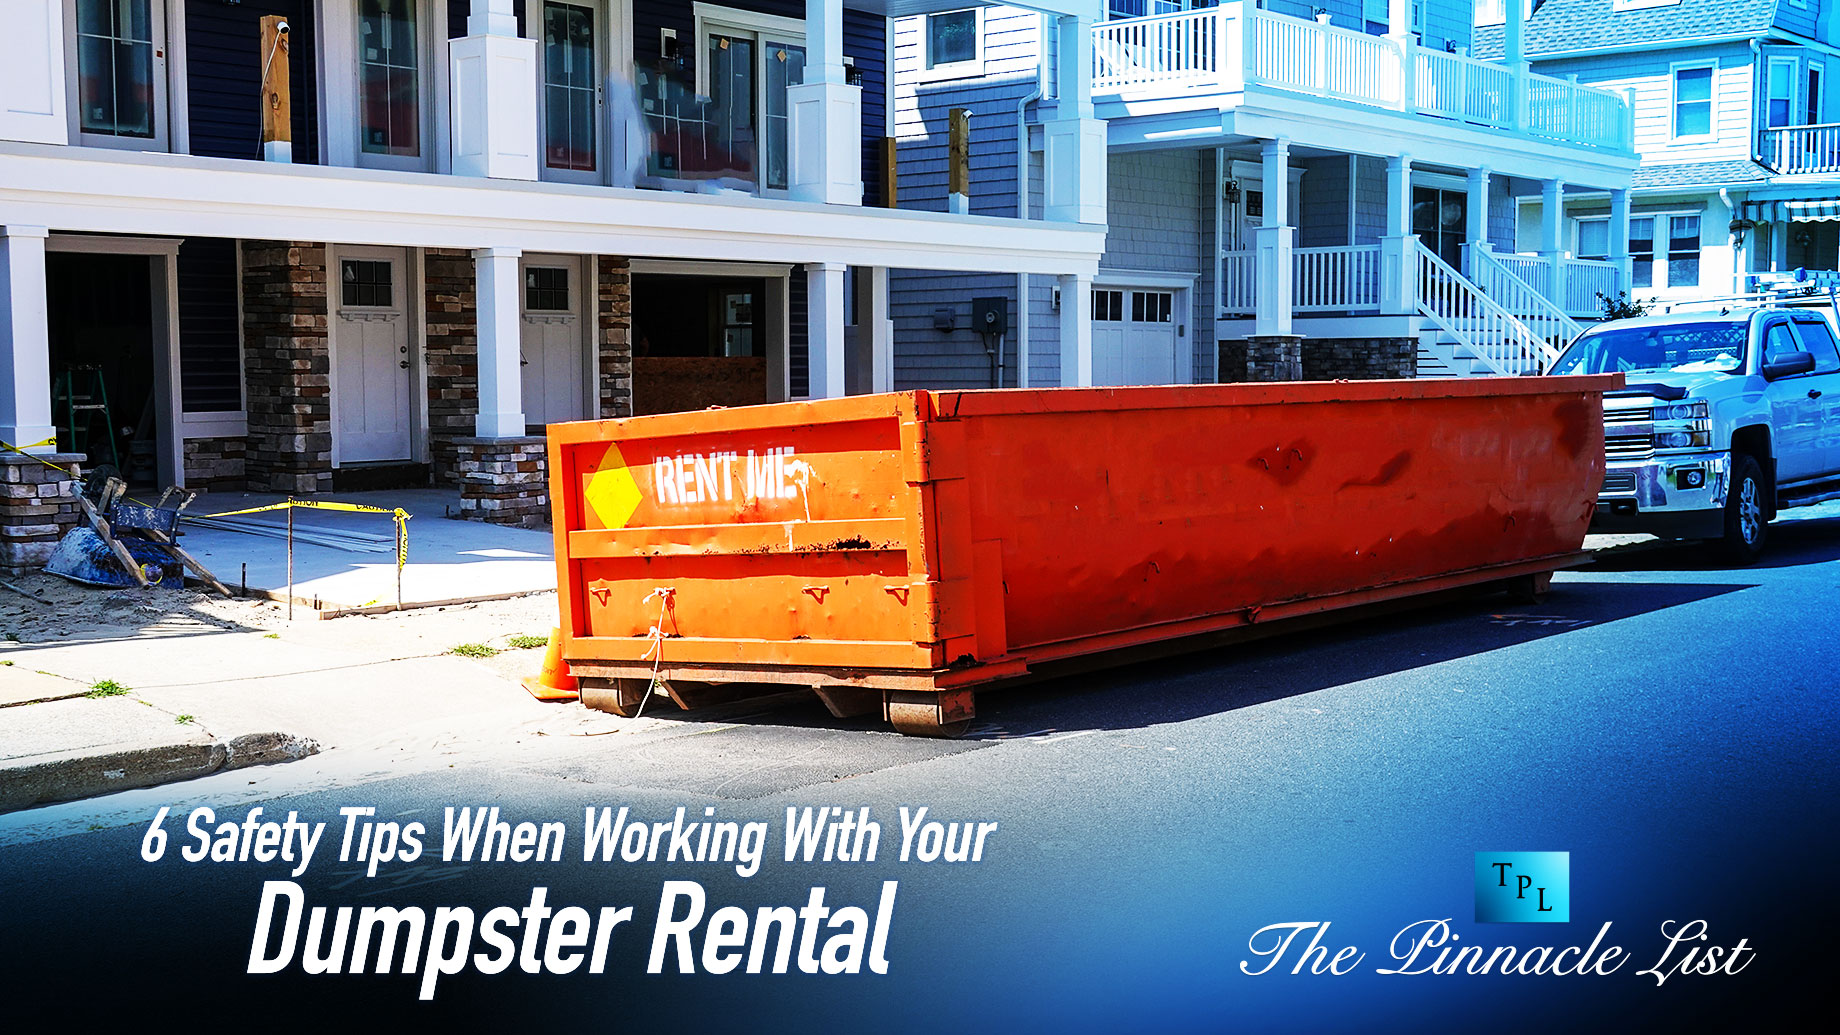 6 Safety Tips When Working With Your Dumpster Rental